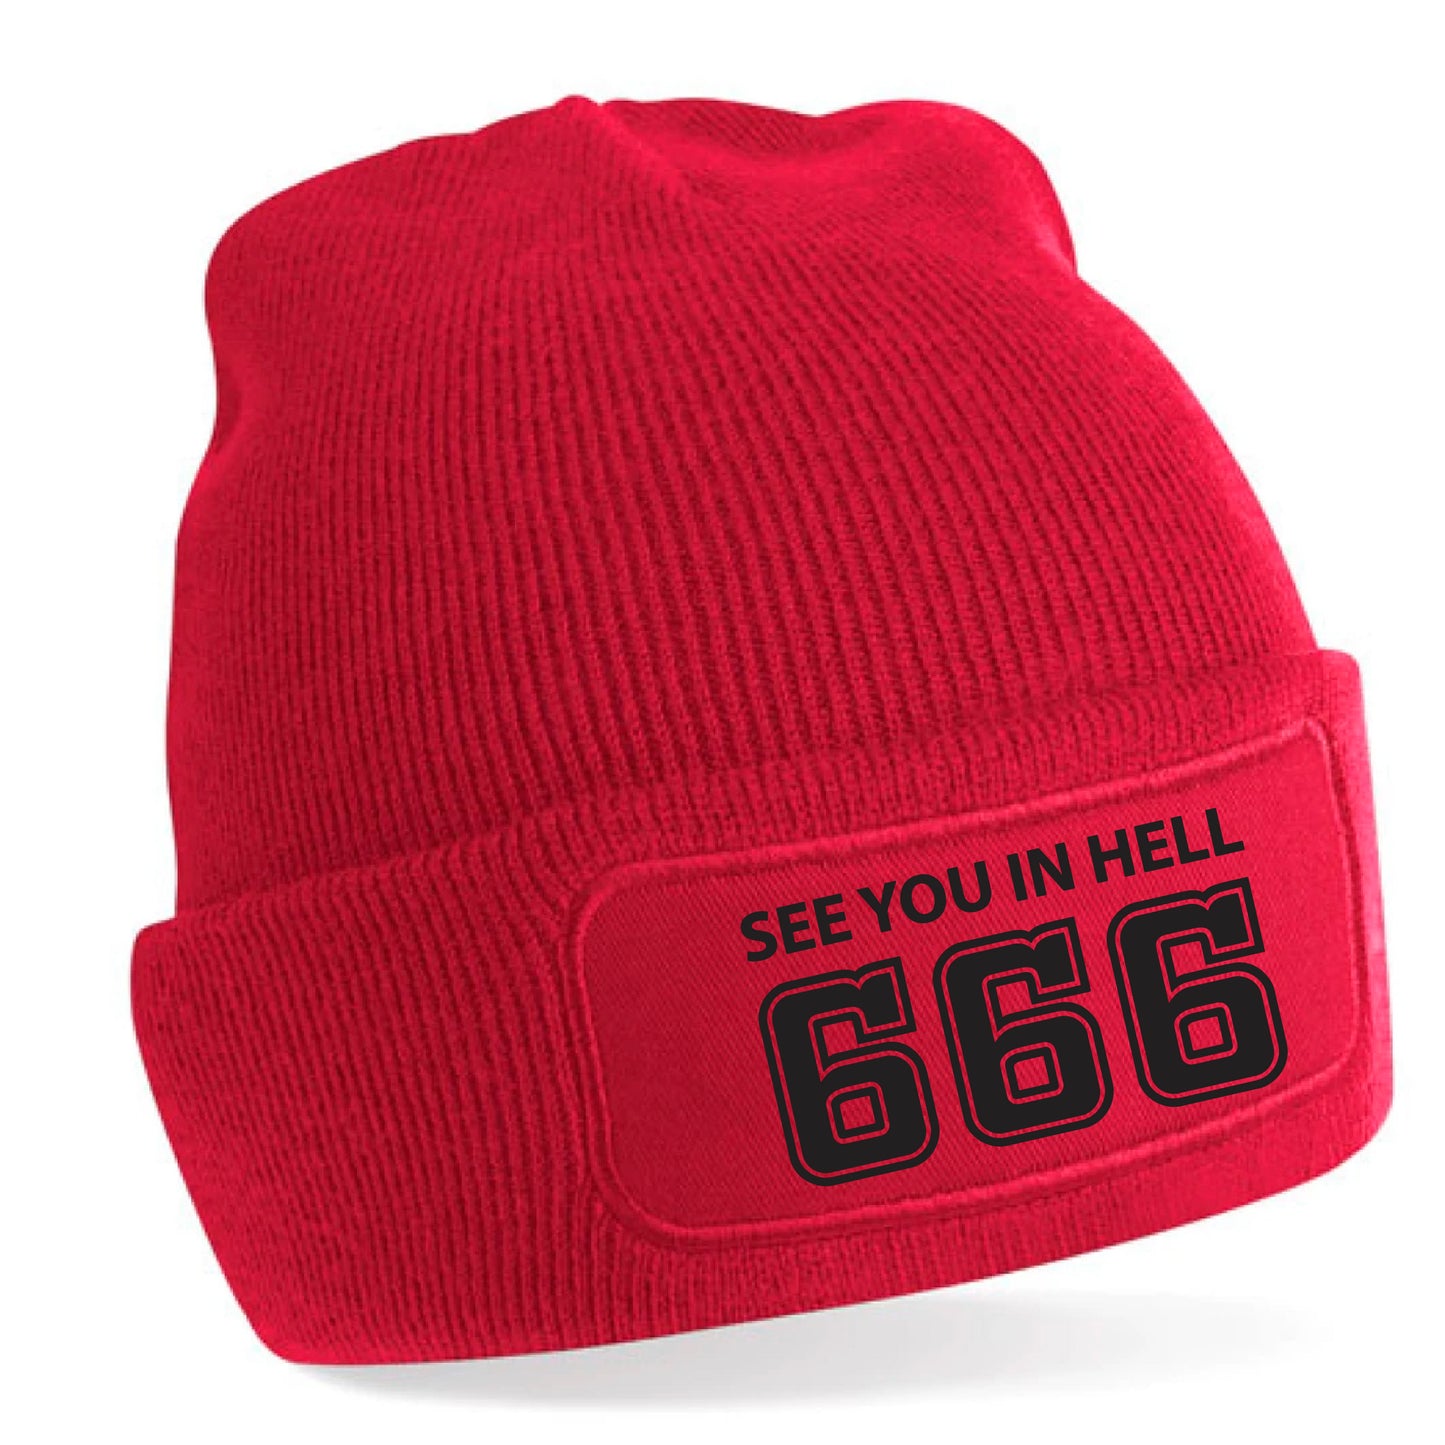 See You In Hell Beanie Hat